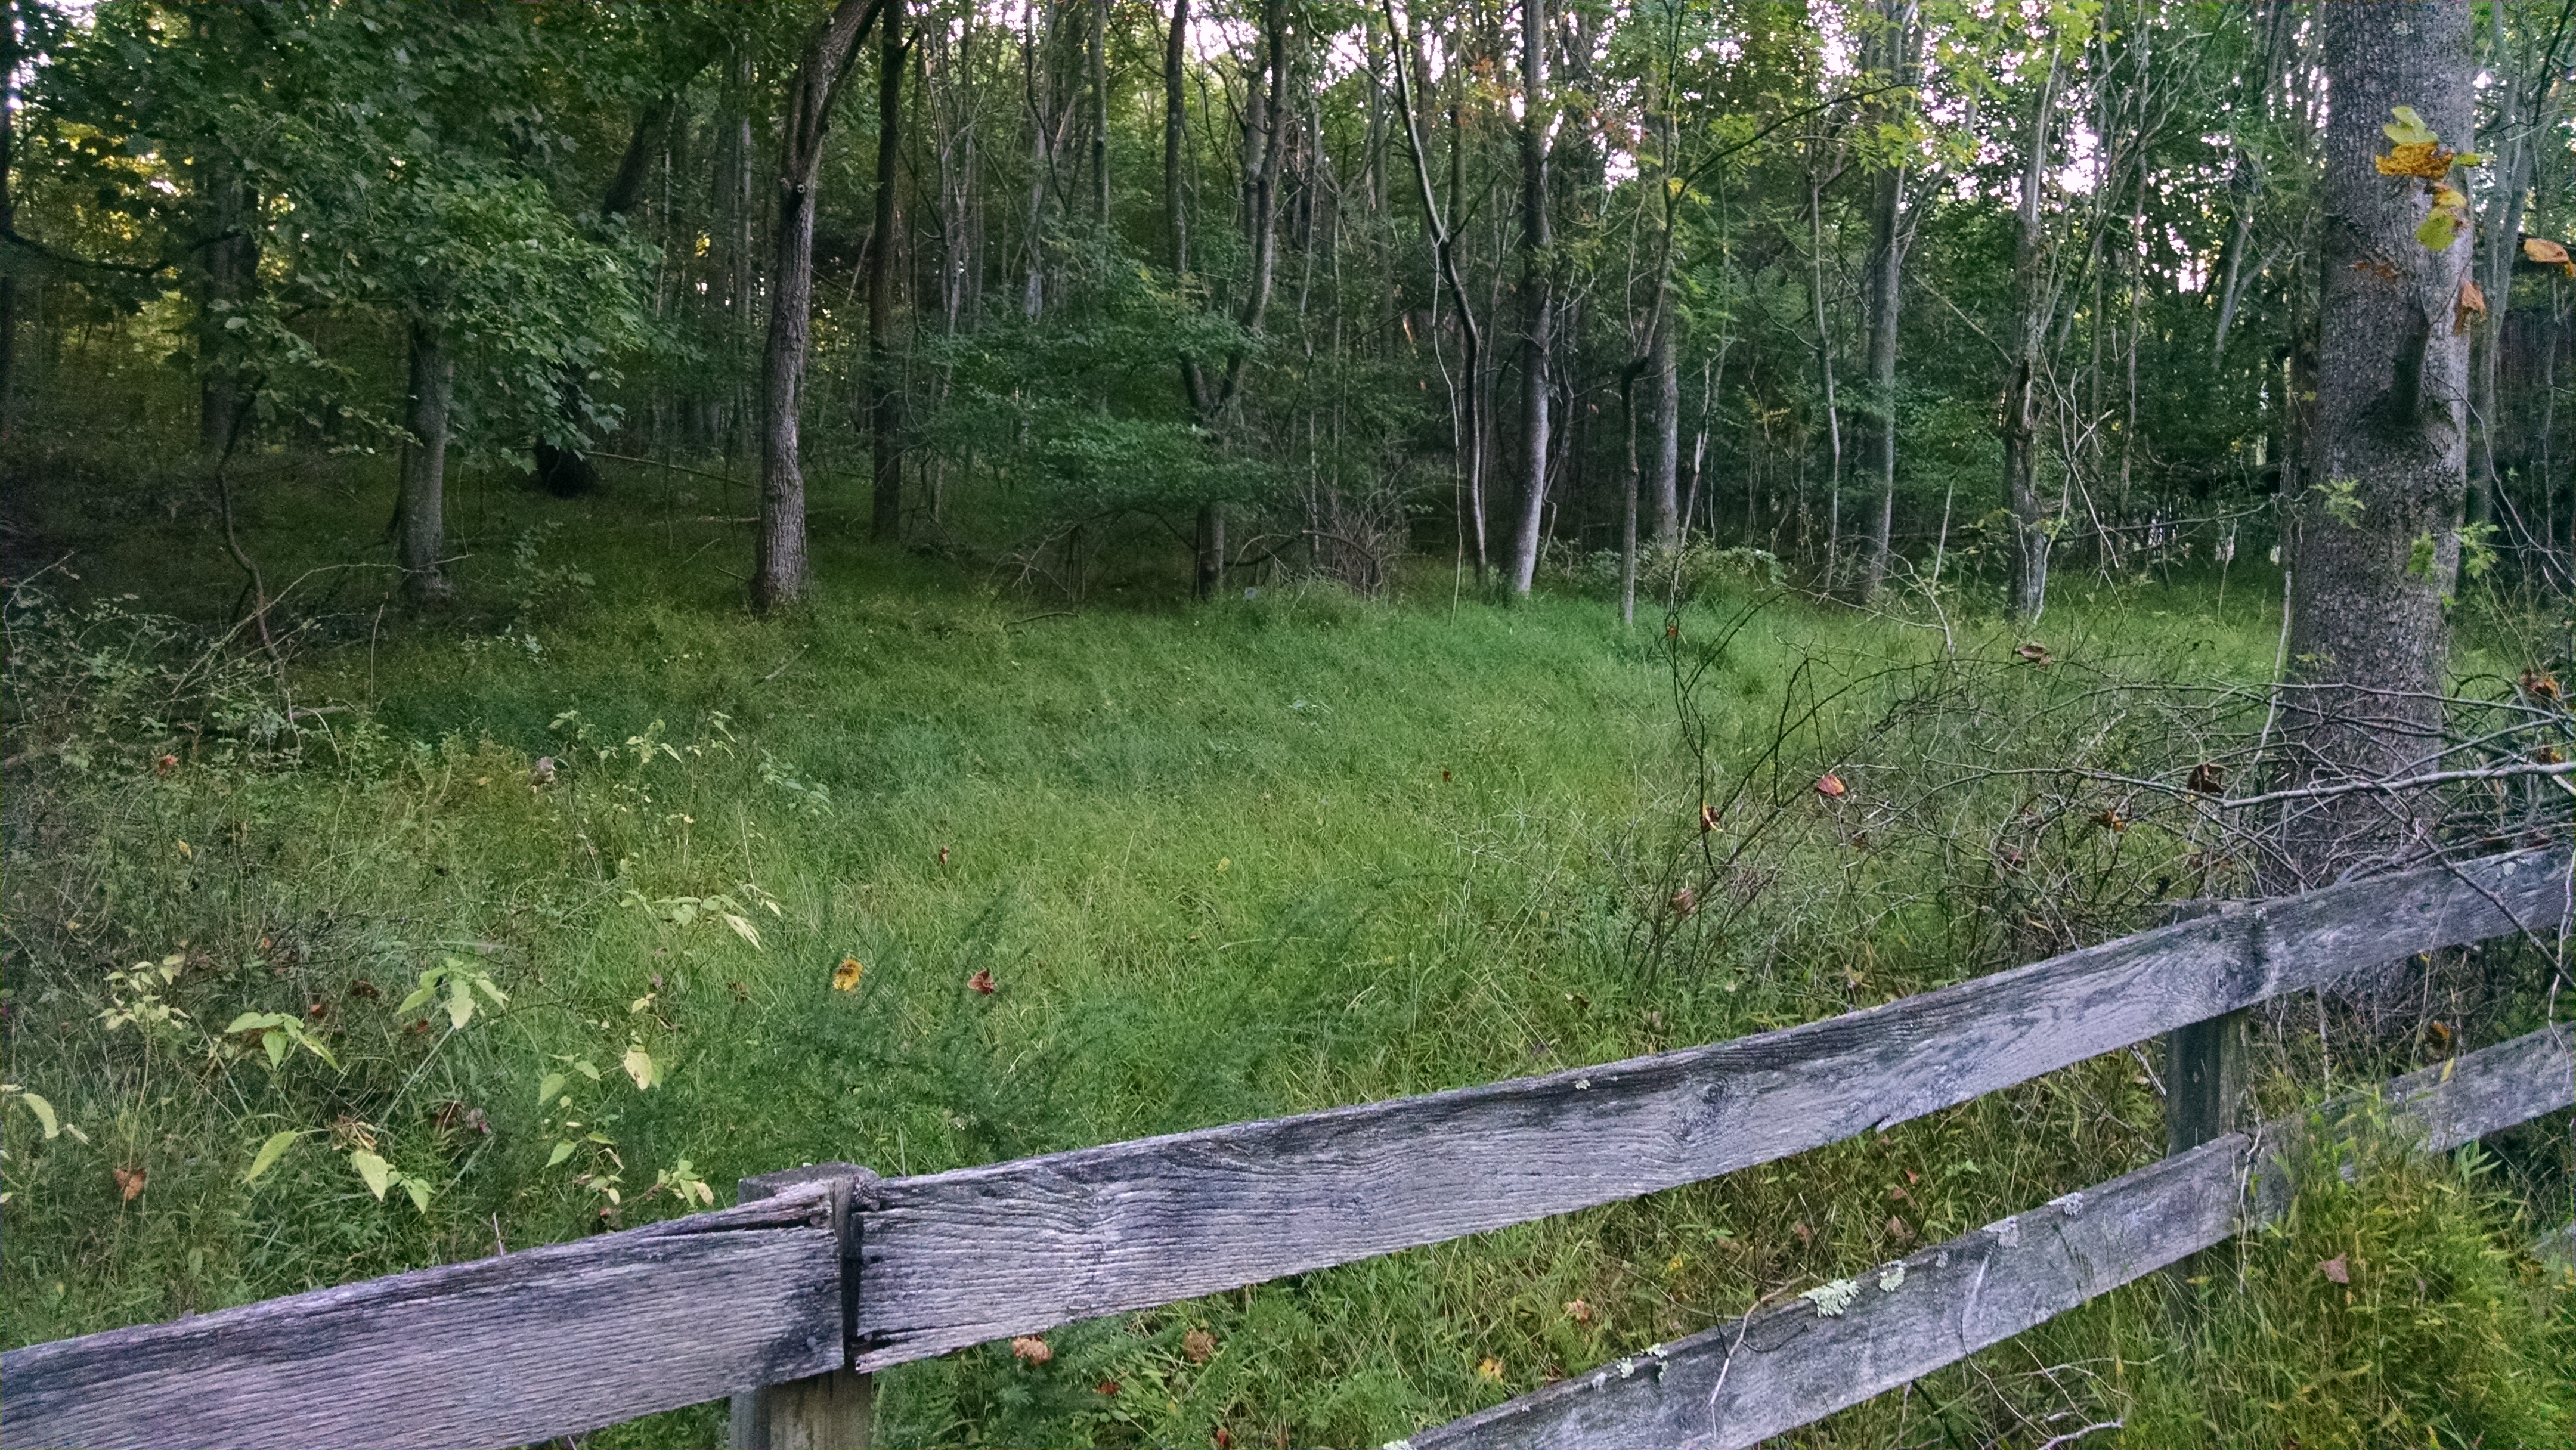 Site of Luther Potterfield's barn where John Mobberly was shot and killed in April 1865